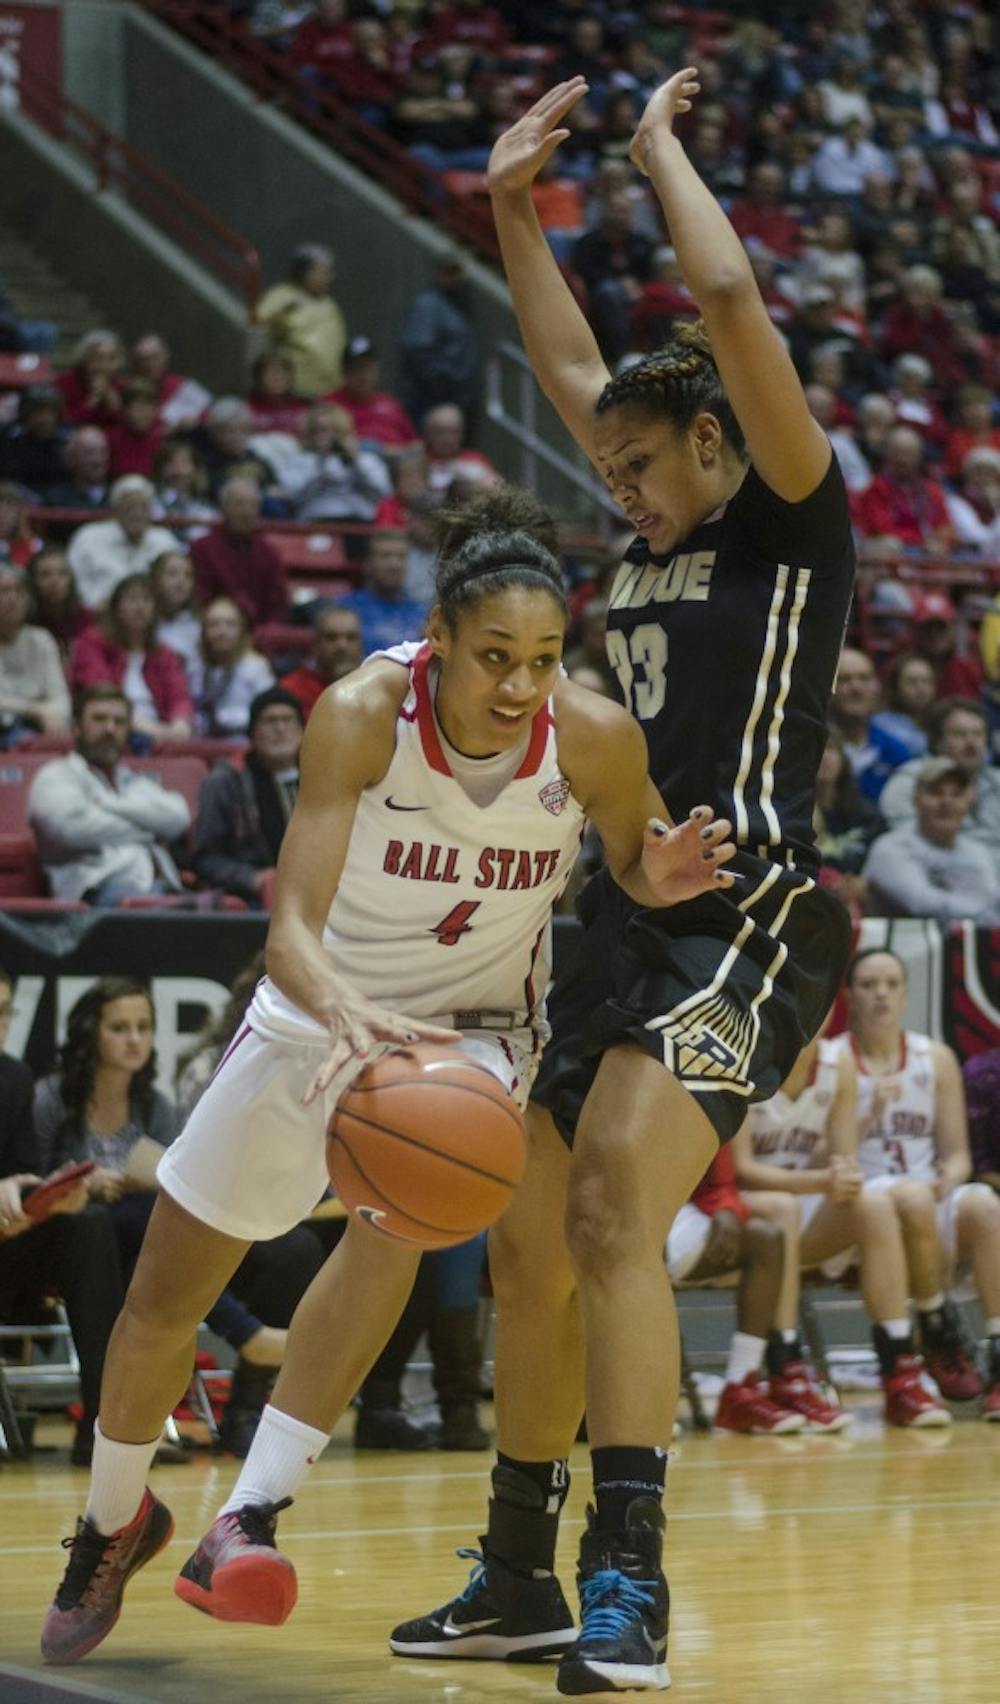 Junior guard Nathalie Fontaine attempts to dribble past a Purdue player during the game on Nov. 14 at Worthen Arena. DN PHOTO BREANNA DAUGHERTY